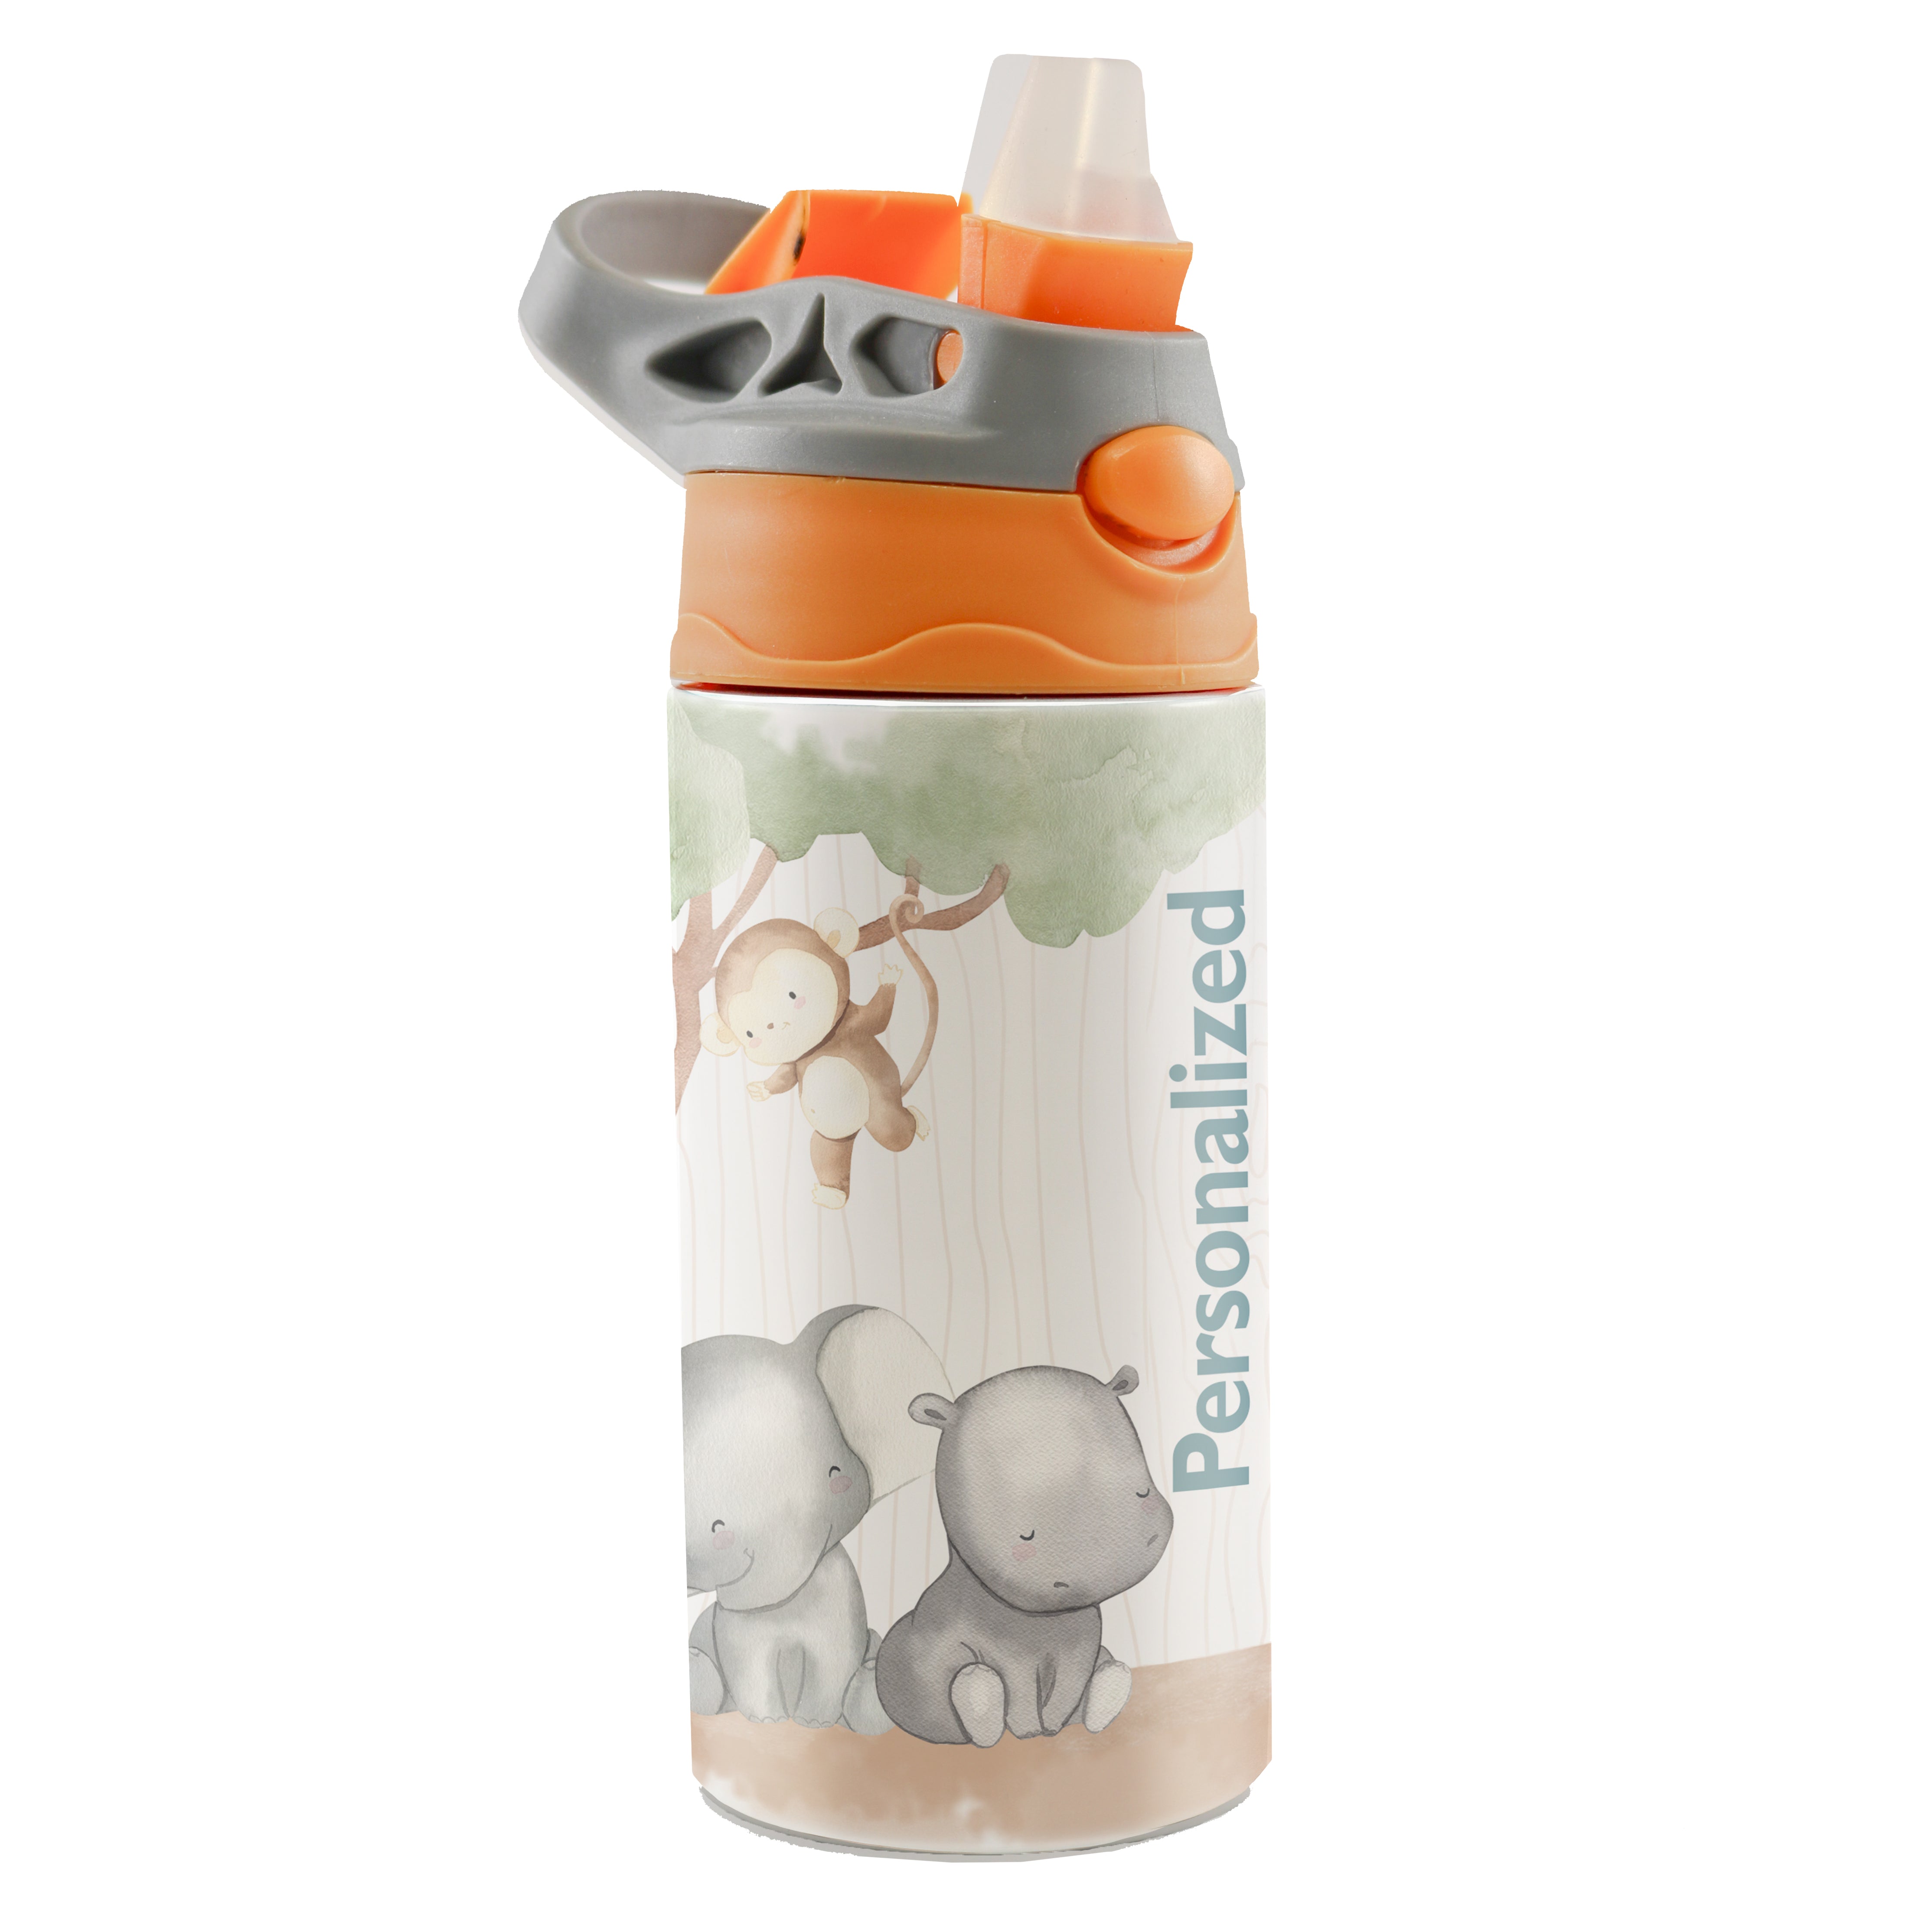 Trend Setters Original (Safari Animals - Personalize with Name) 12 oz Stainless Steel Water Bottle with Orange and Grey Lid